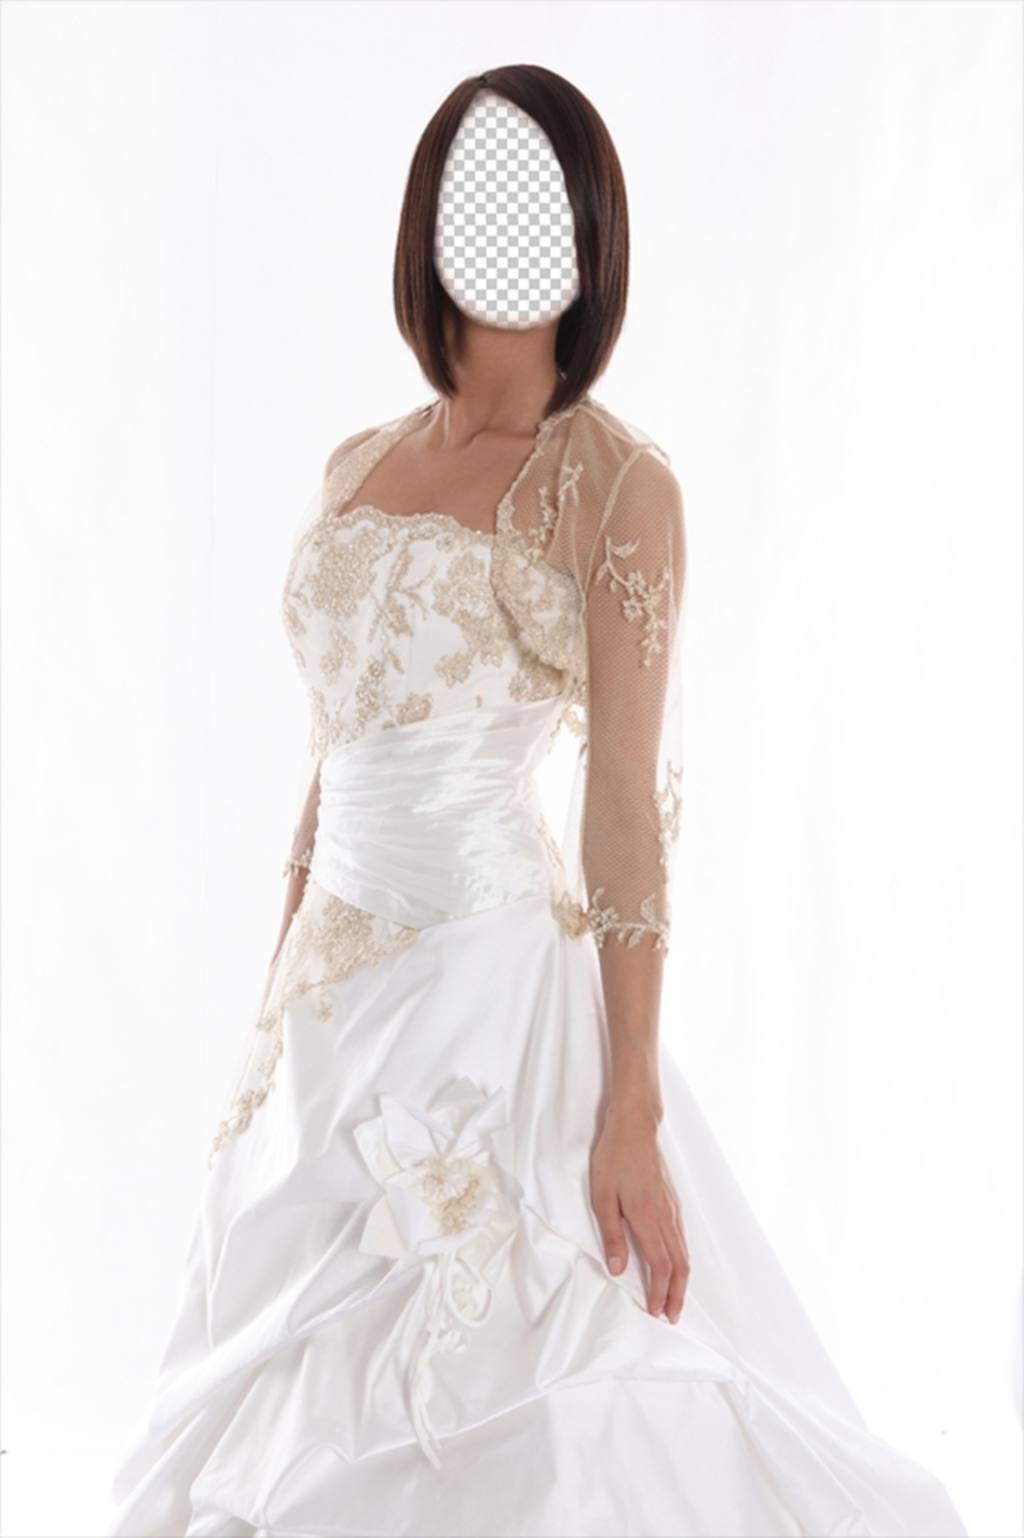 Photomontage to dress up as a bride with brown and short hair ..